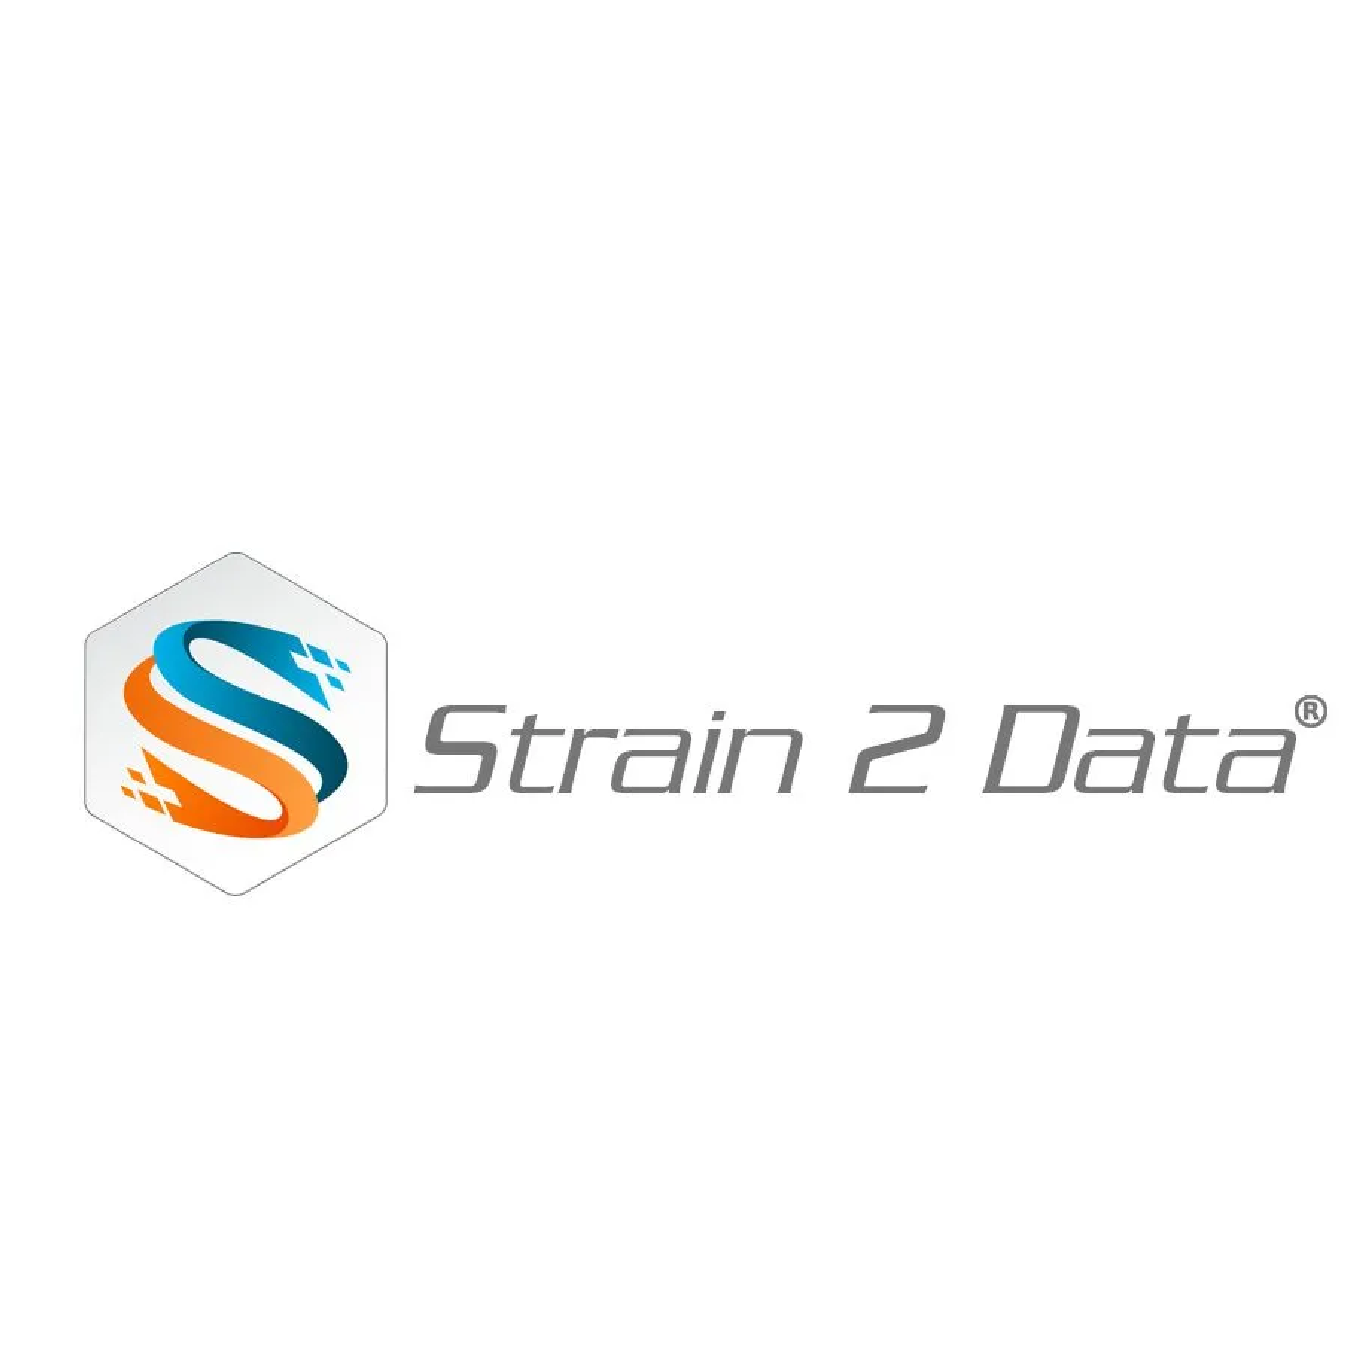 Strain 2 Data leads in strain-based sensor solutions with Spydar, revolutionizing material science and structural health monitoring for extreme environments.